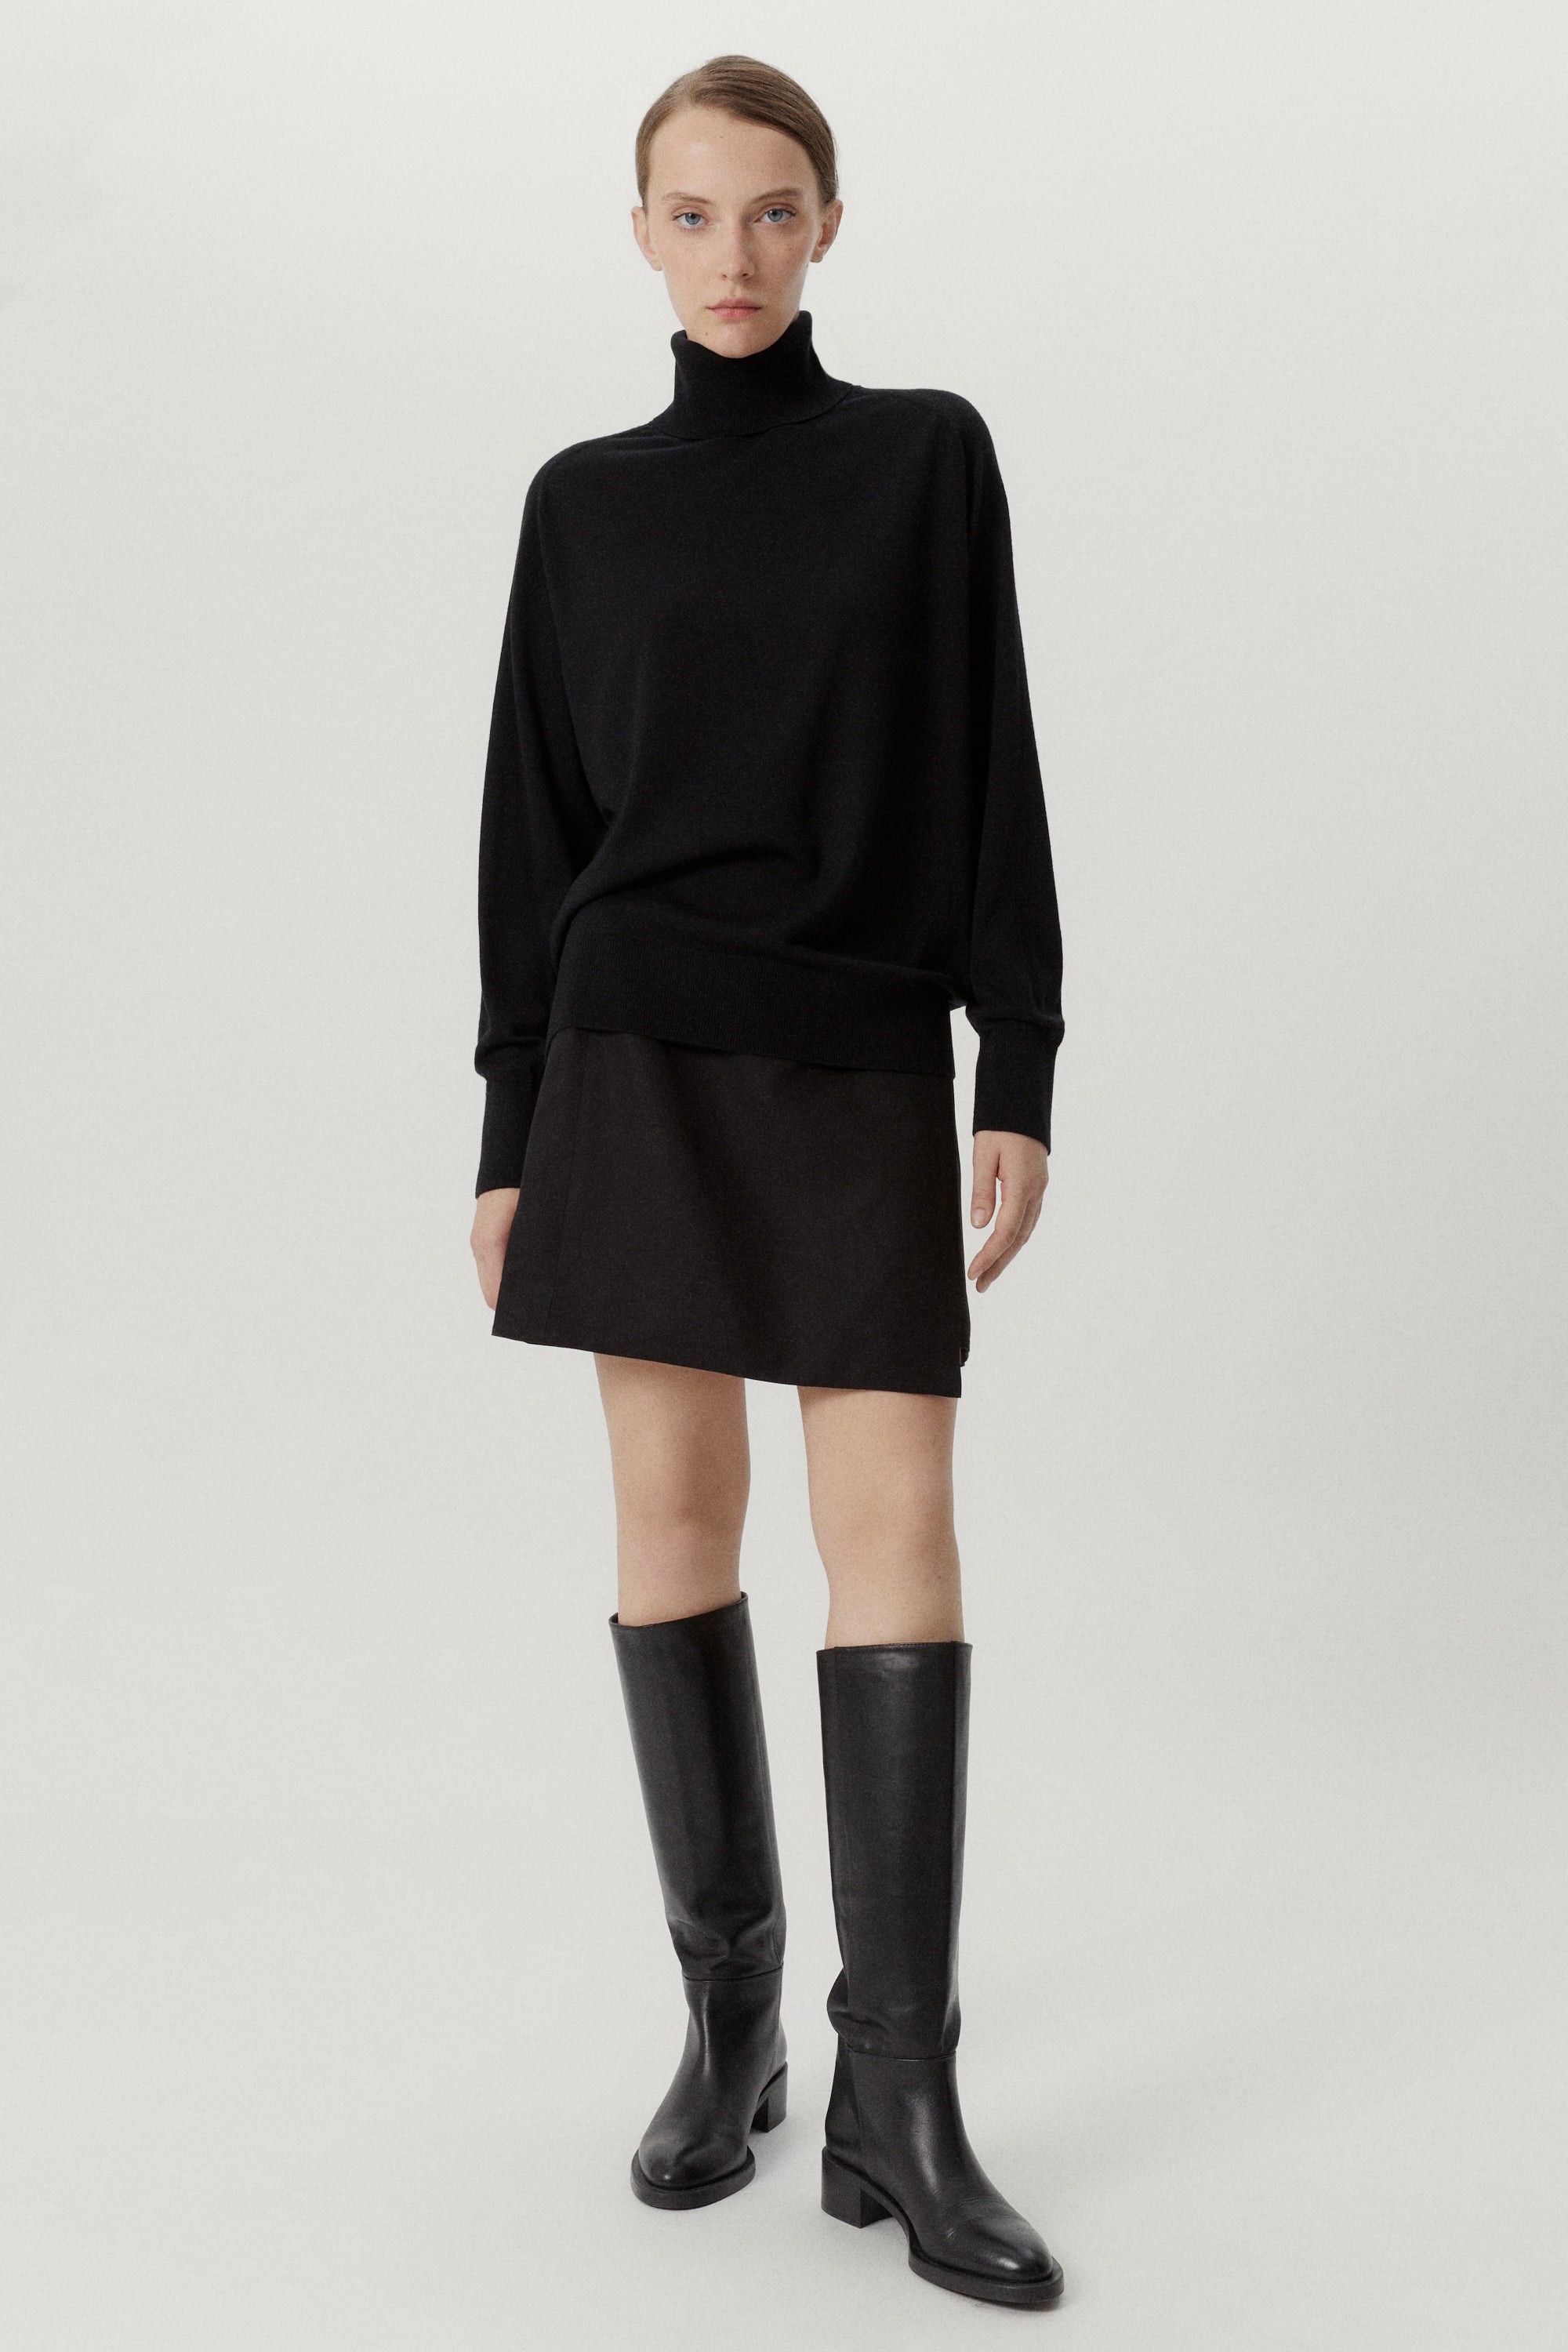 the ultrasoft wool relaxed roll neck black